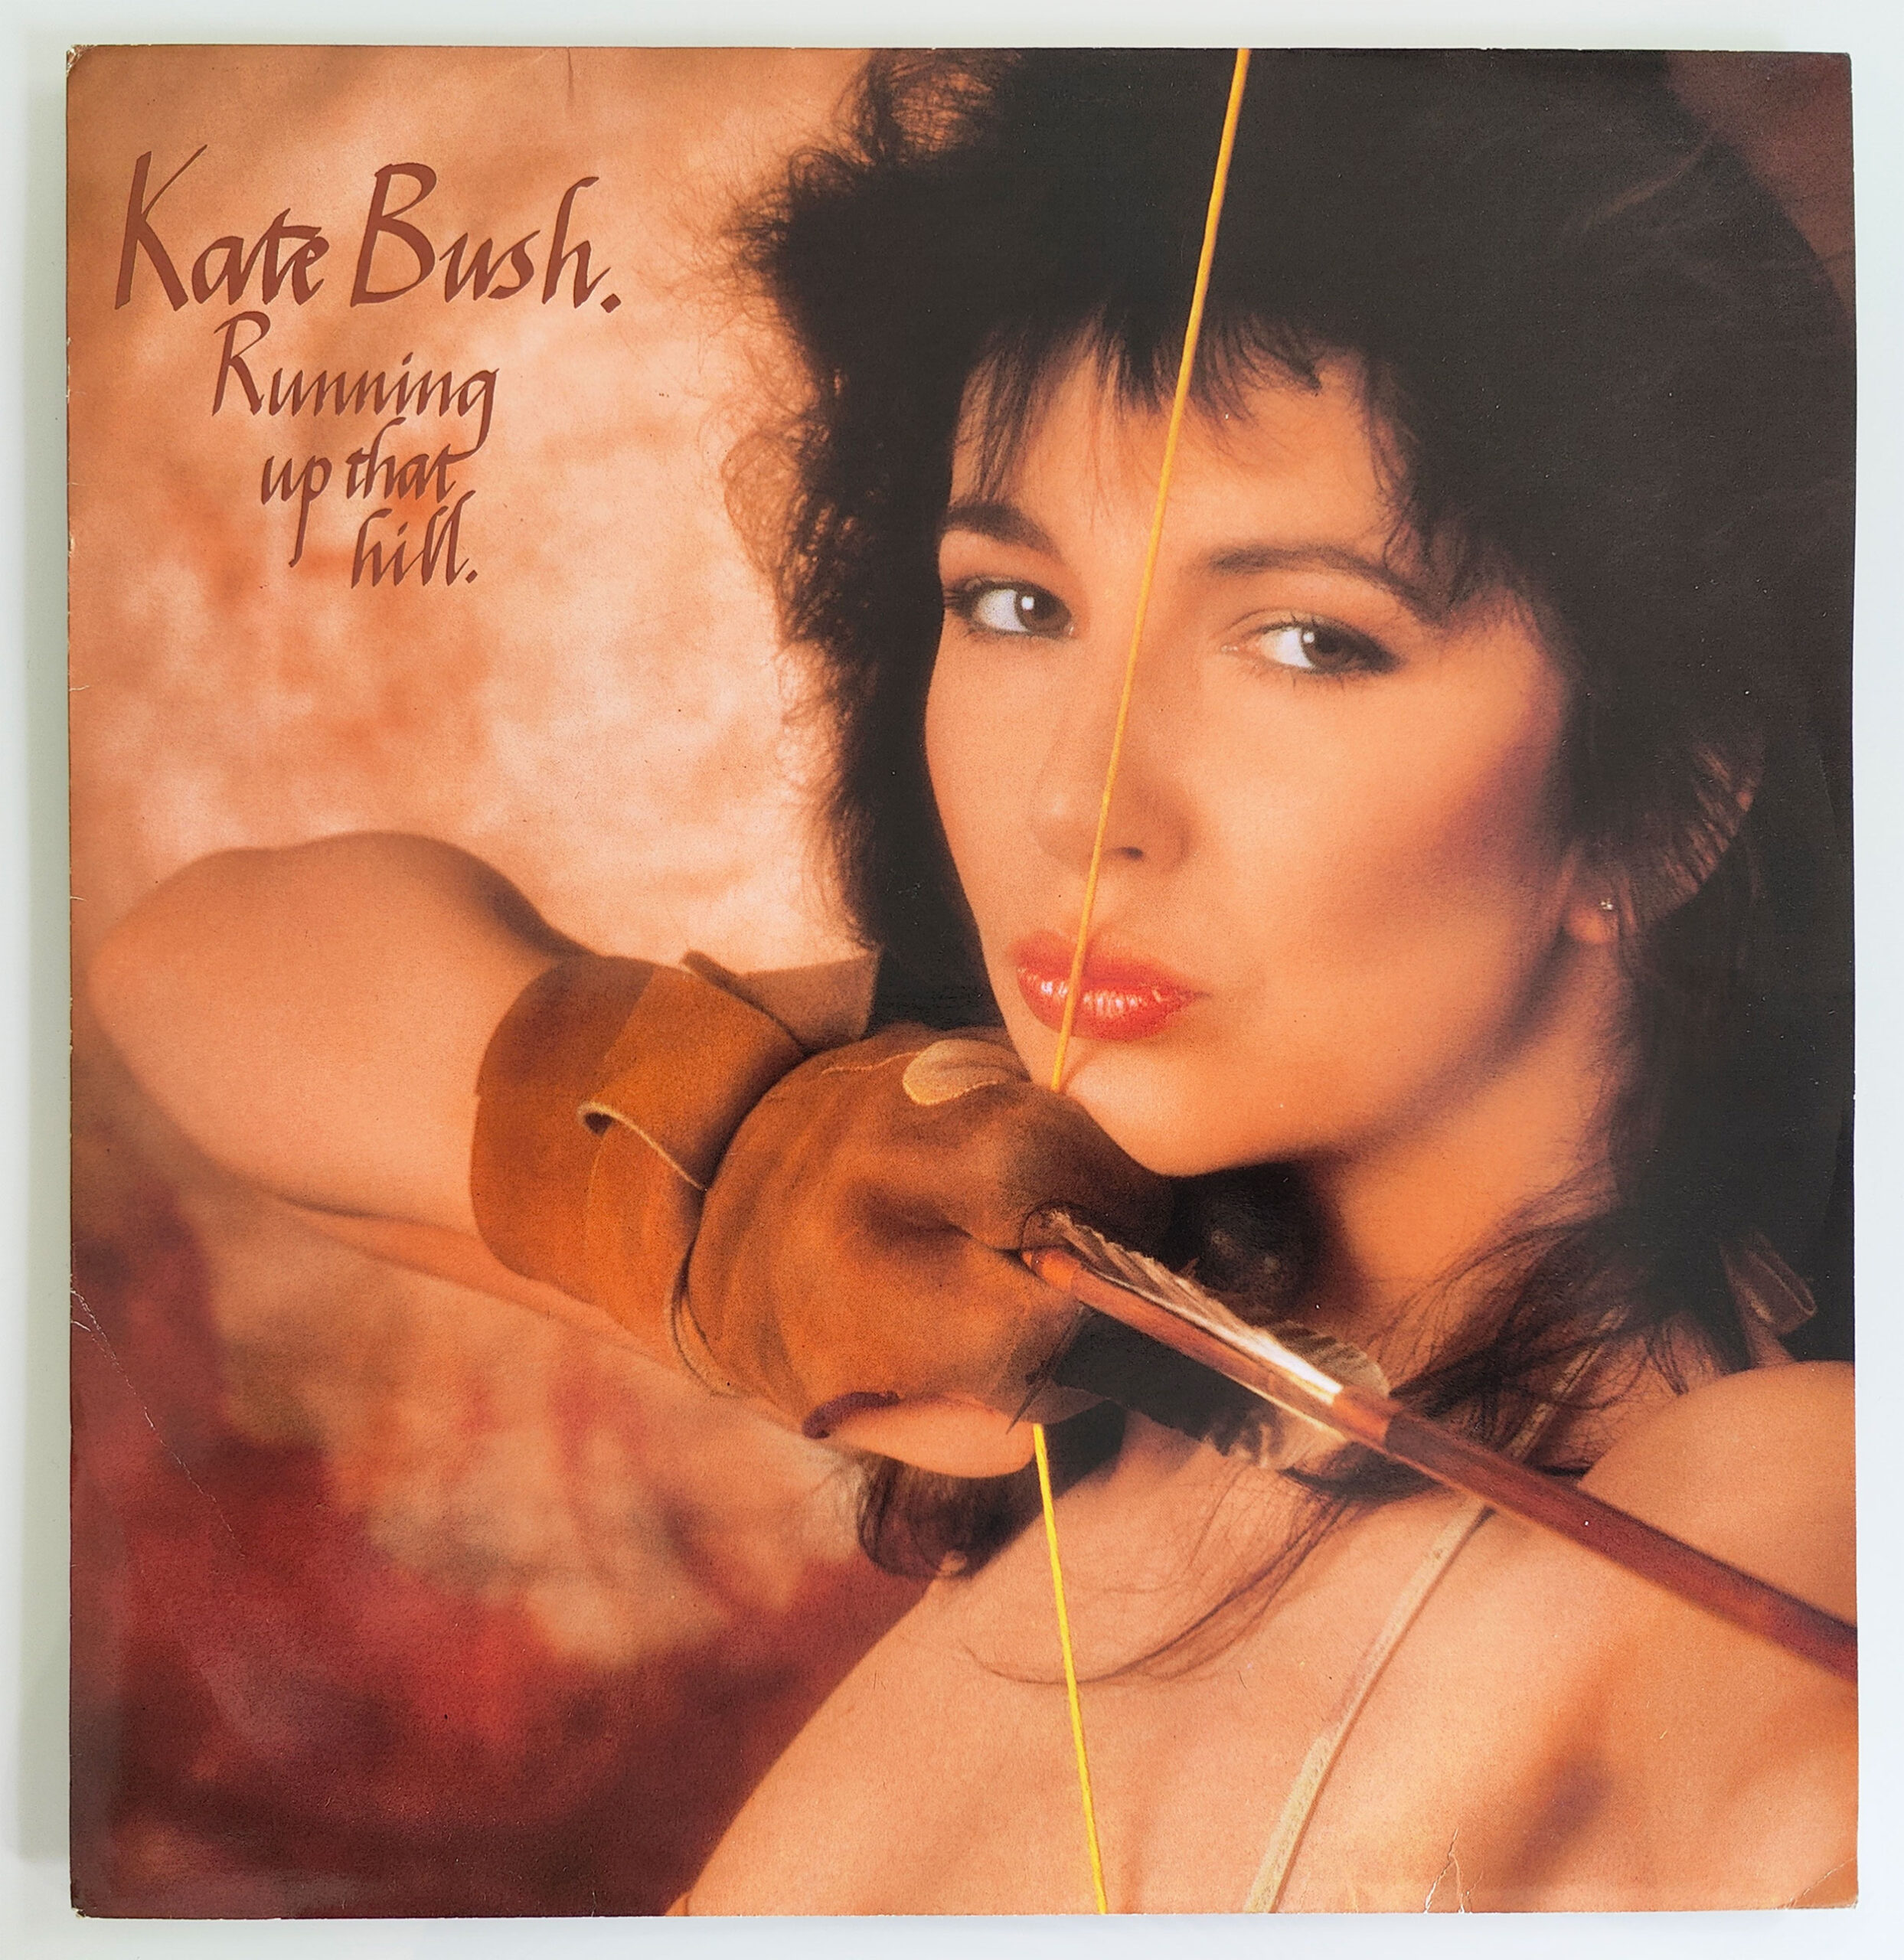 You Always Wanted To Know About Kate Bush's Running Up That Hill* SuperDeluxeEdition